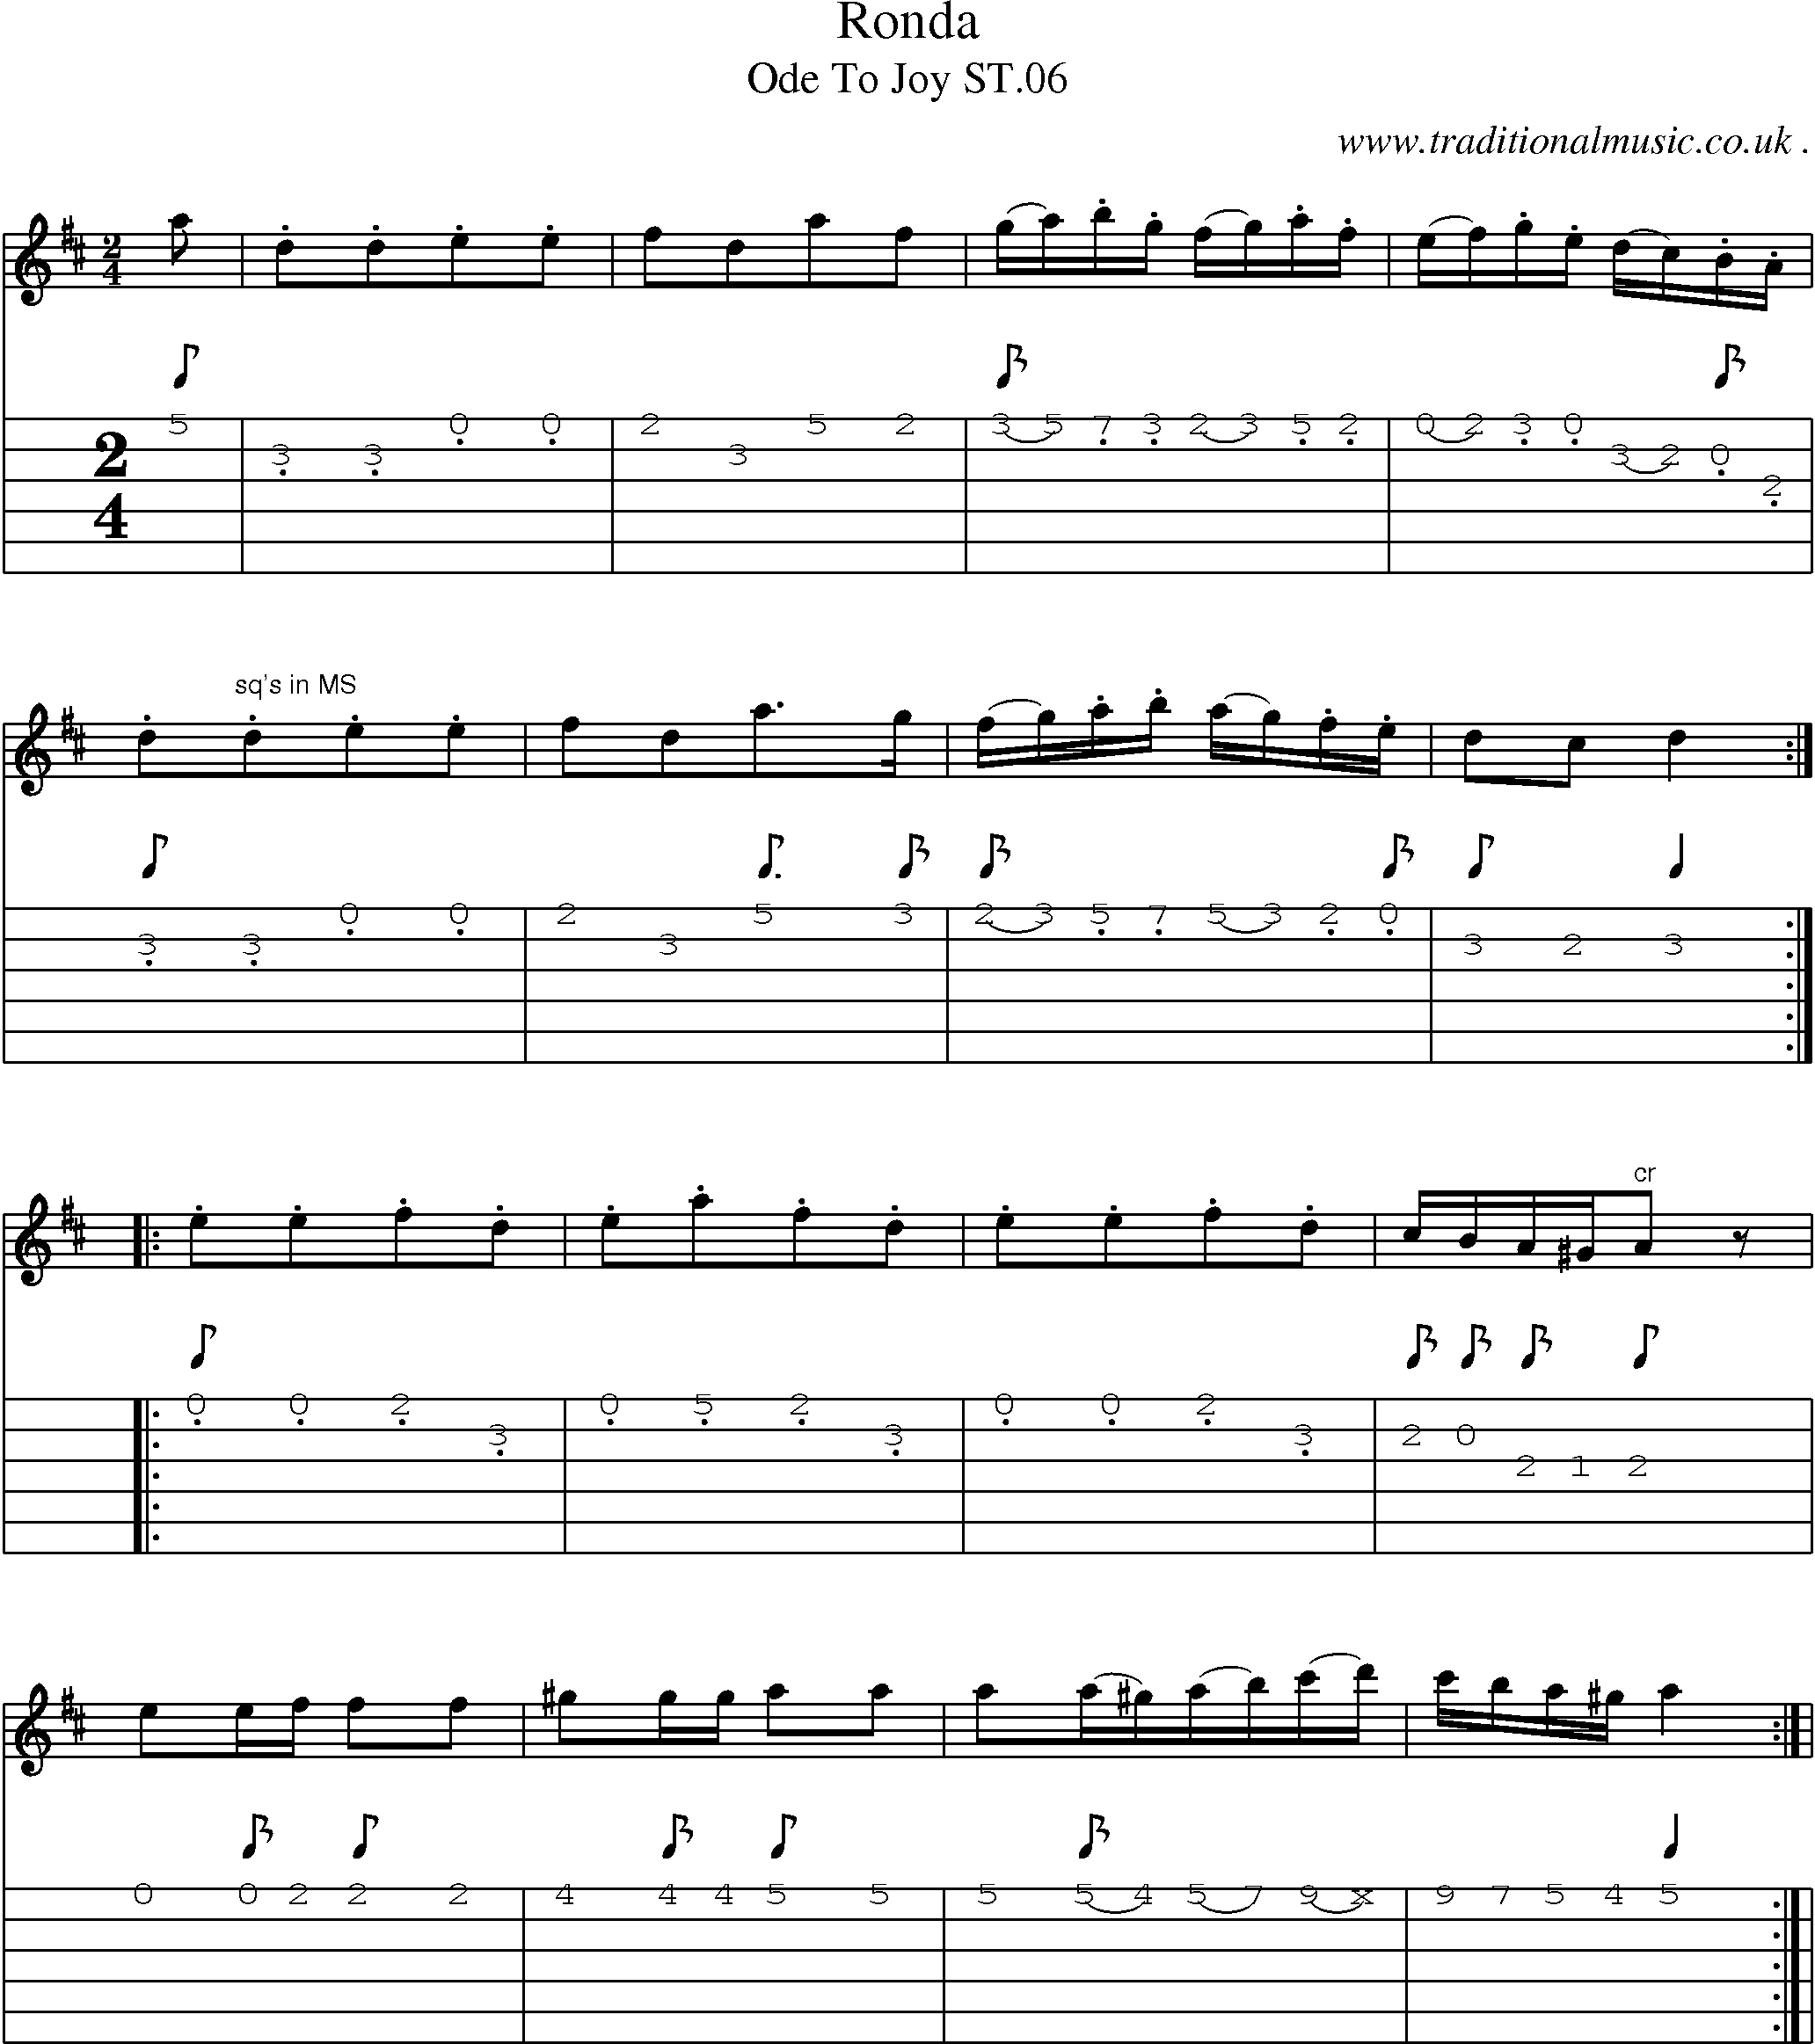 Sheet-Music and Guitar Tabs for Ronda